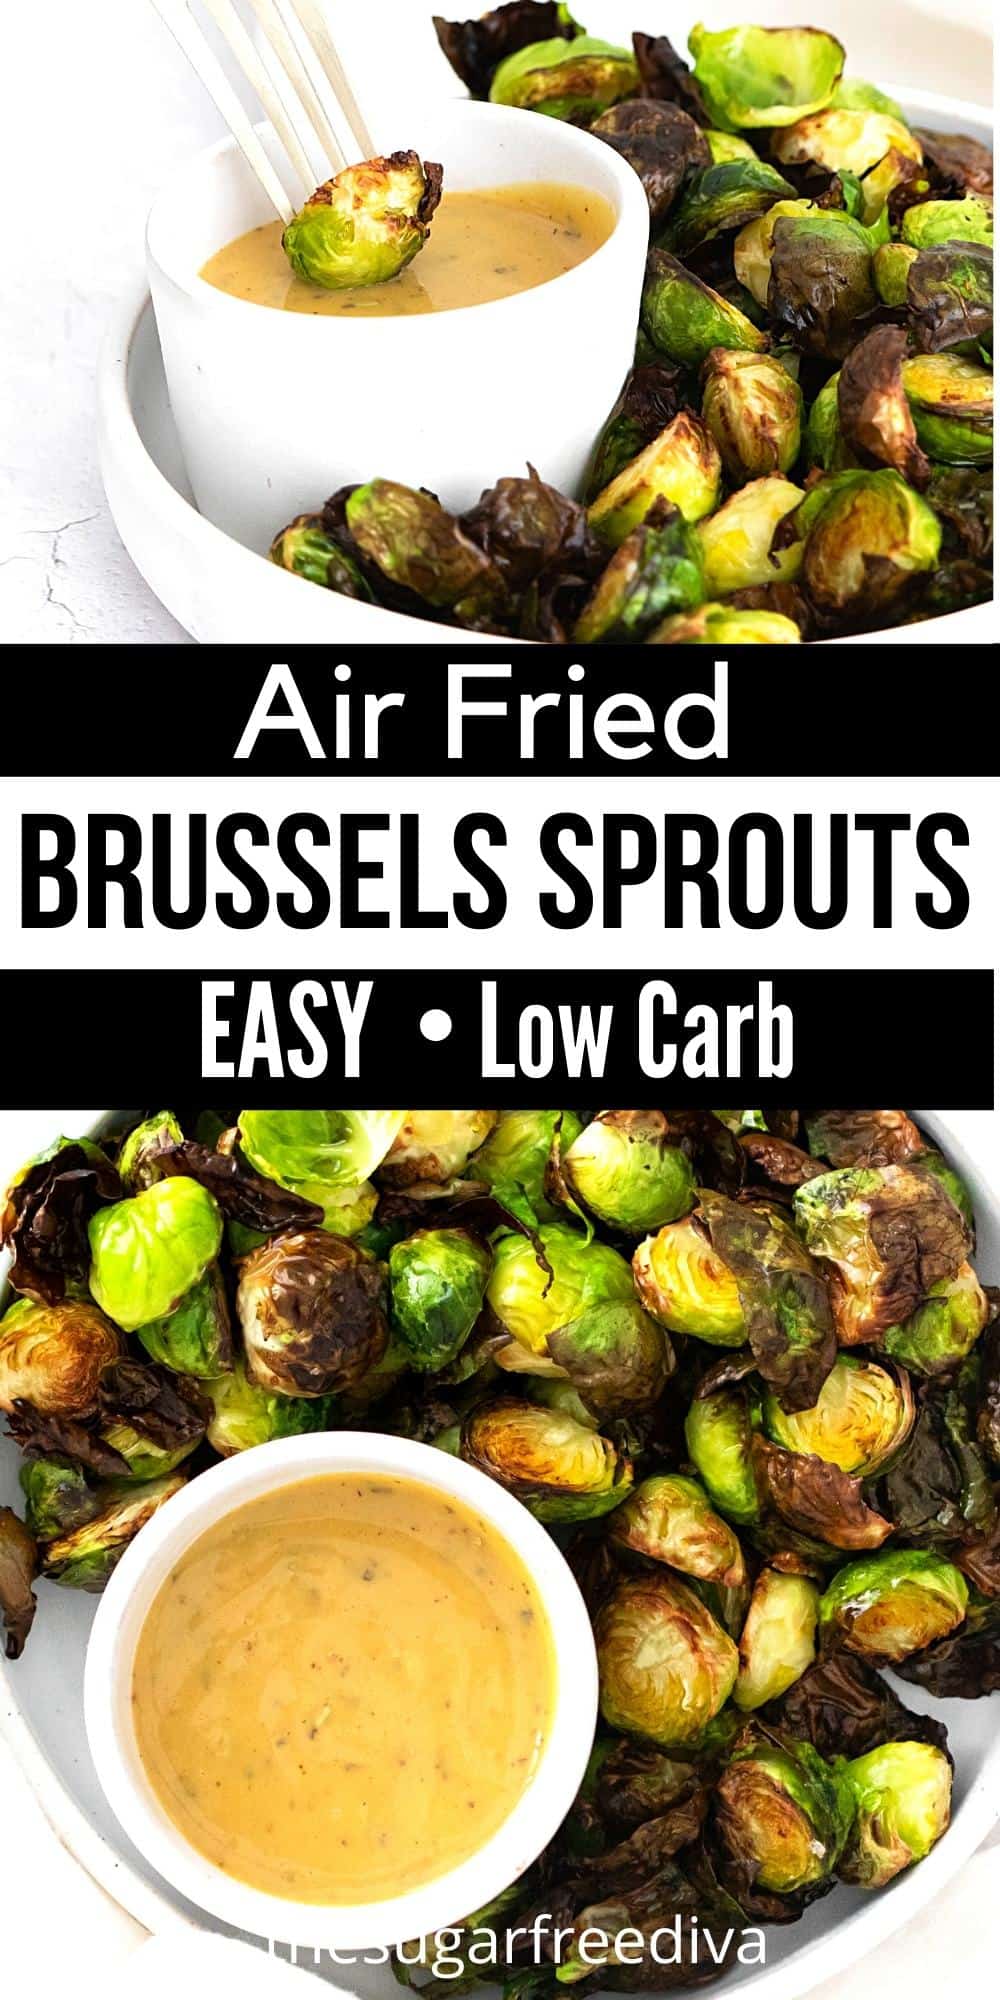 How to Air Fry Brussels Sprouts